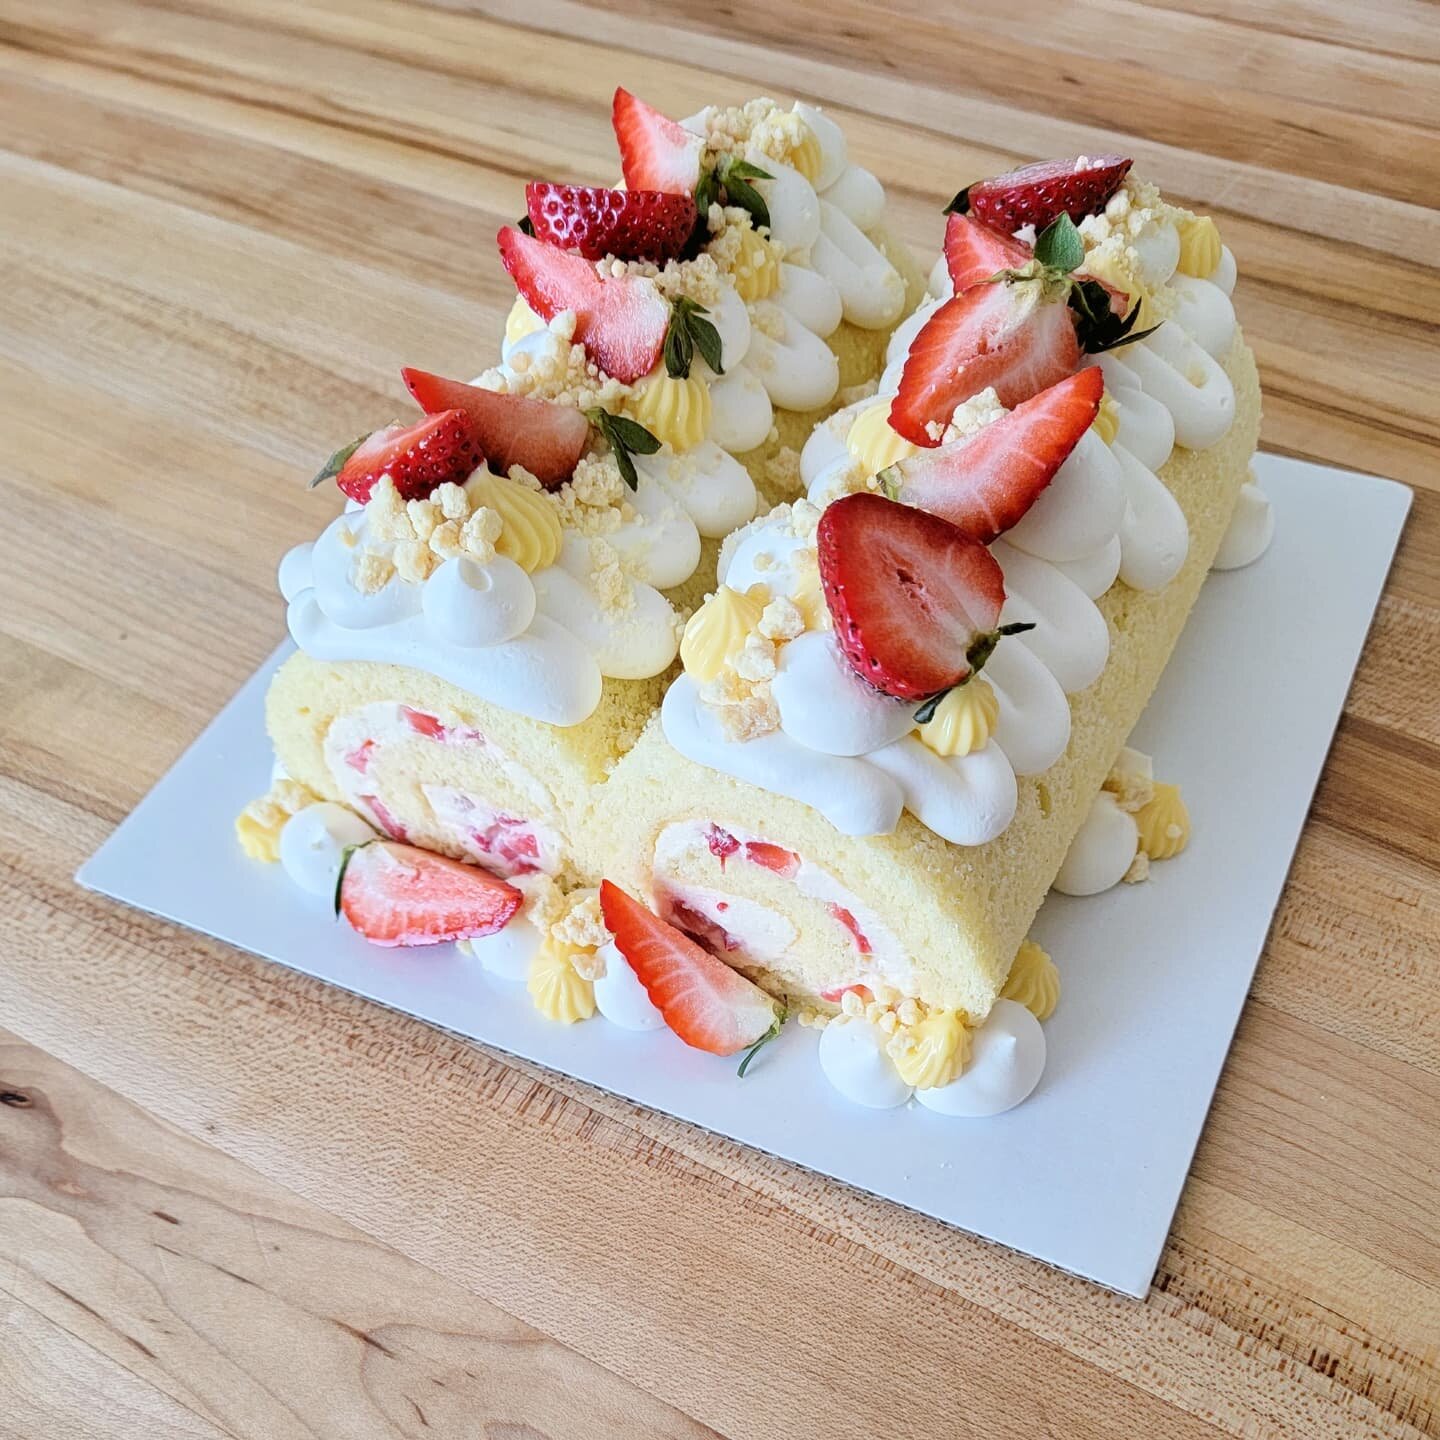 Is it just me or is summer just rolling by? Our pastry pick up will be back at the end of the month. Interested in cake? Fill out a special request form for more information! 🤗

Vanilla roll cake with passion cream filling and strawberry bits. Toppe